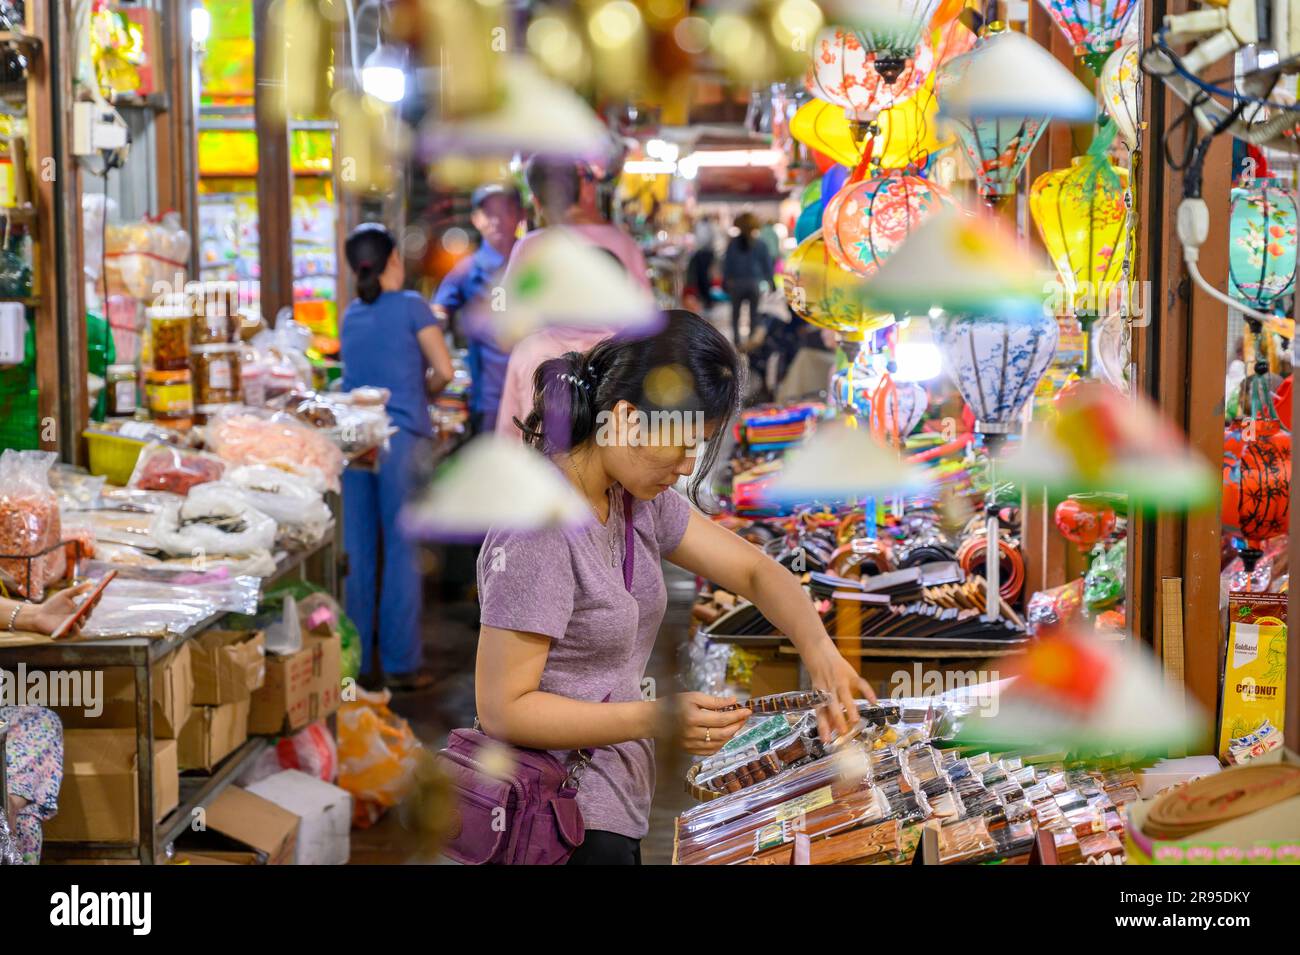 A female vendor tends to her crafts stall in Hoi An Market in old town Hoi An, Vietnam. Stock Photo